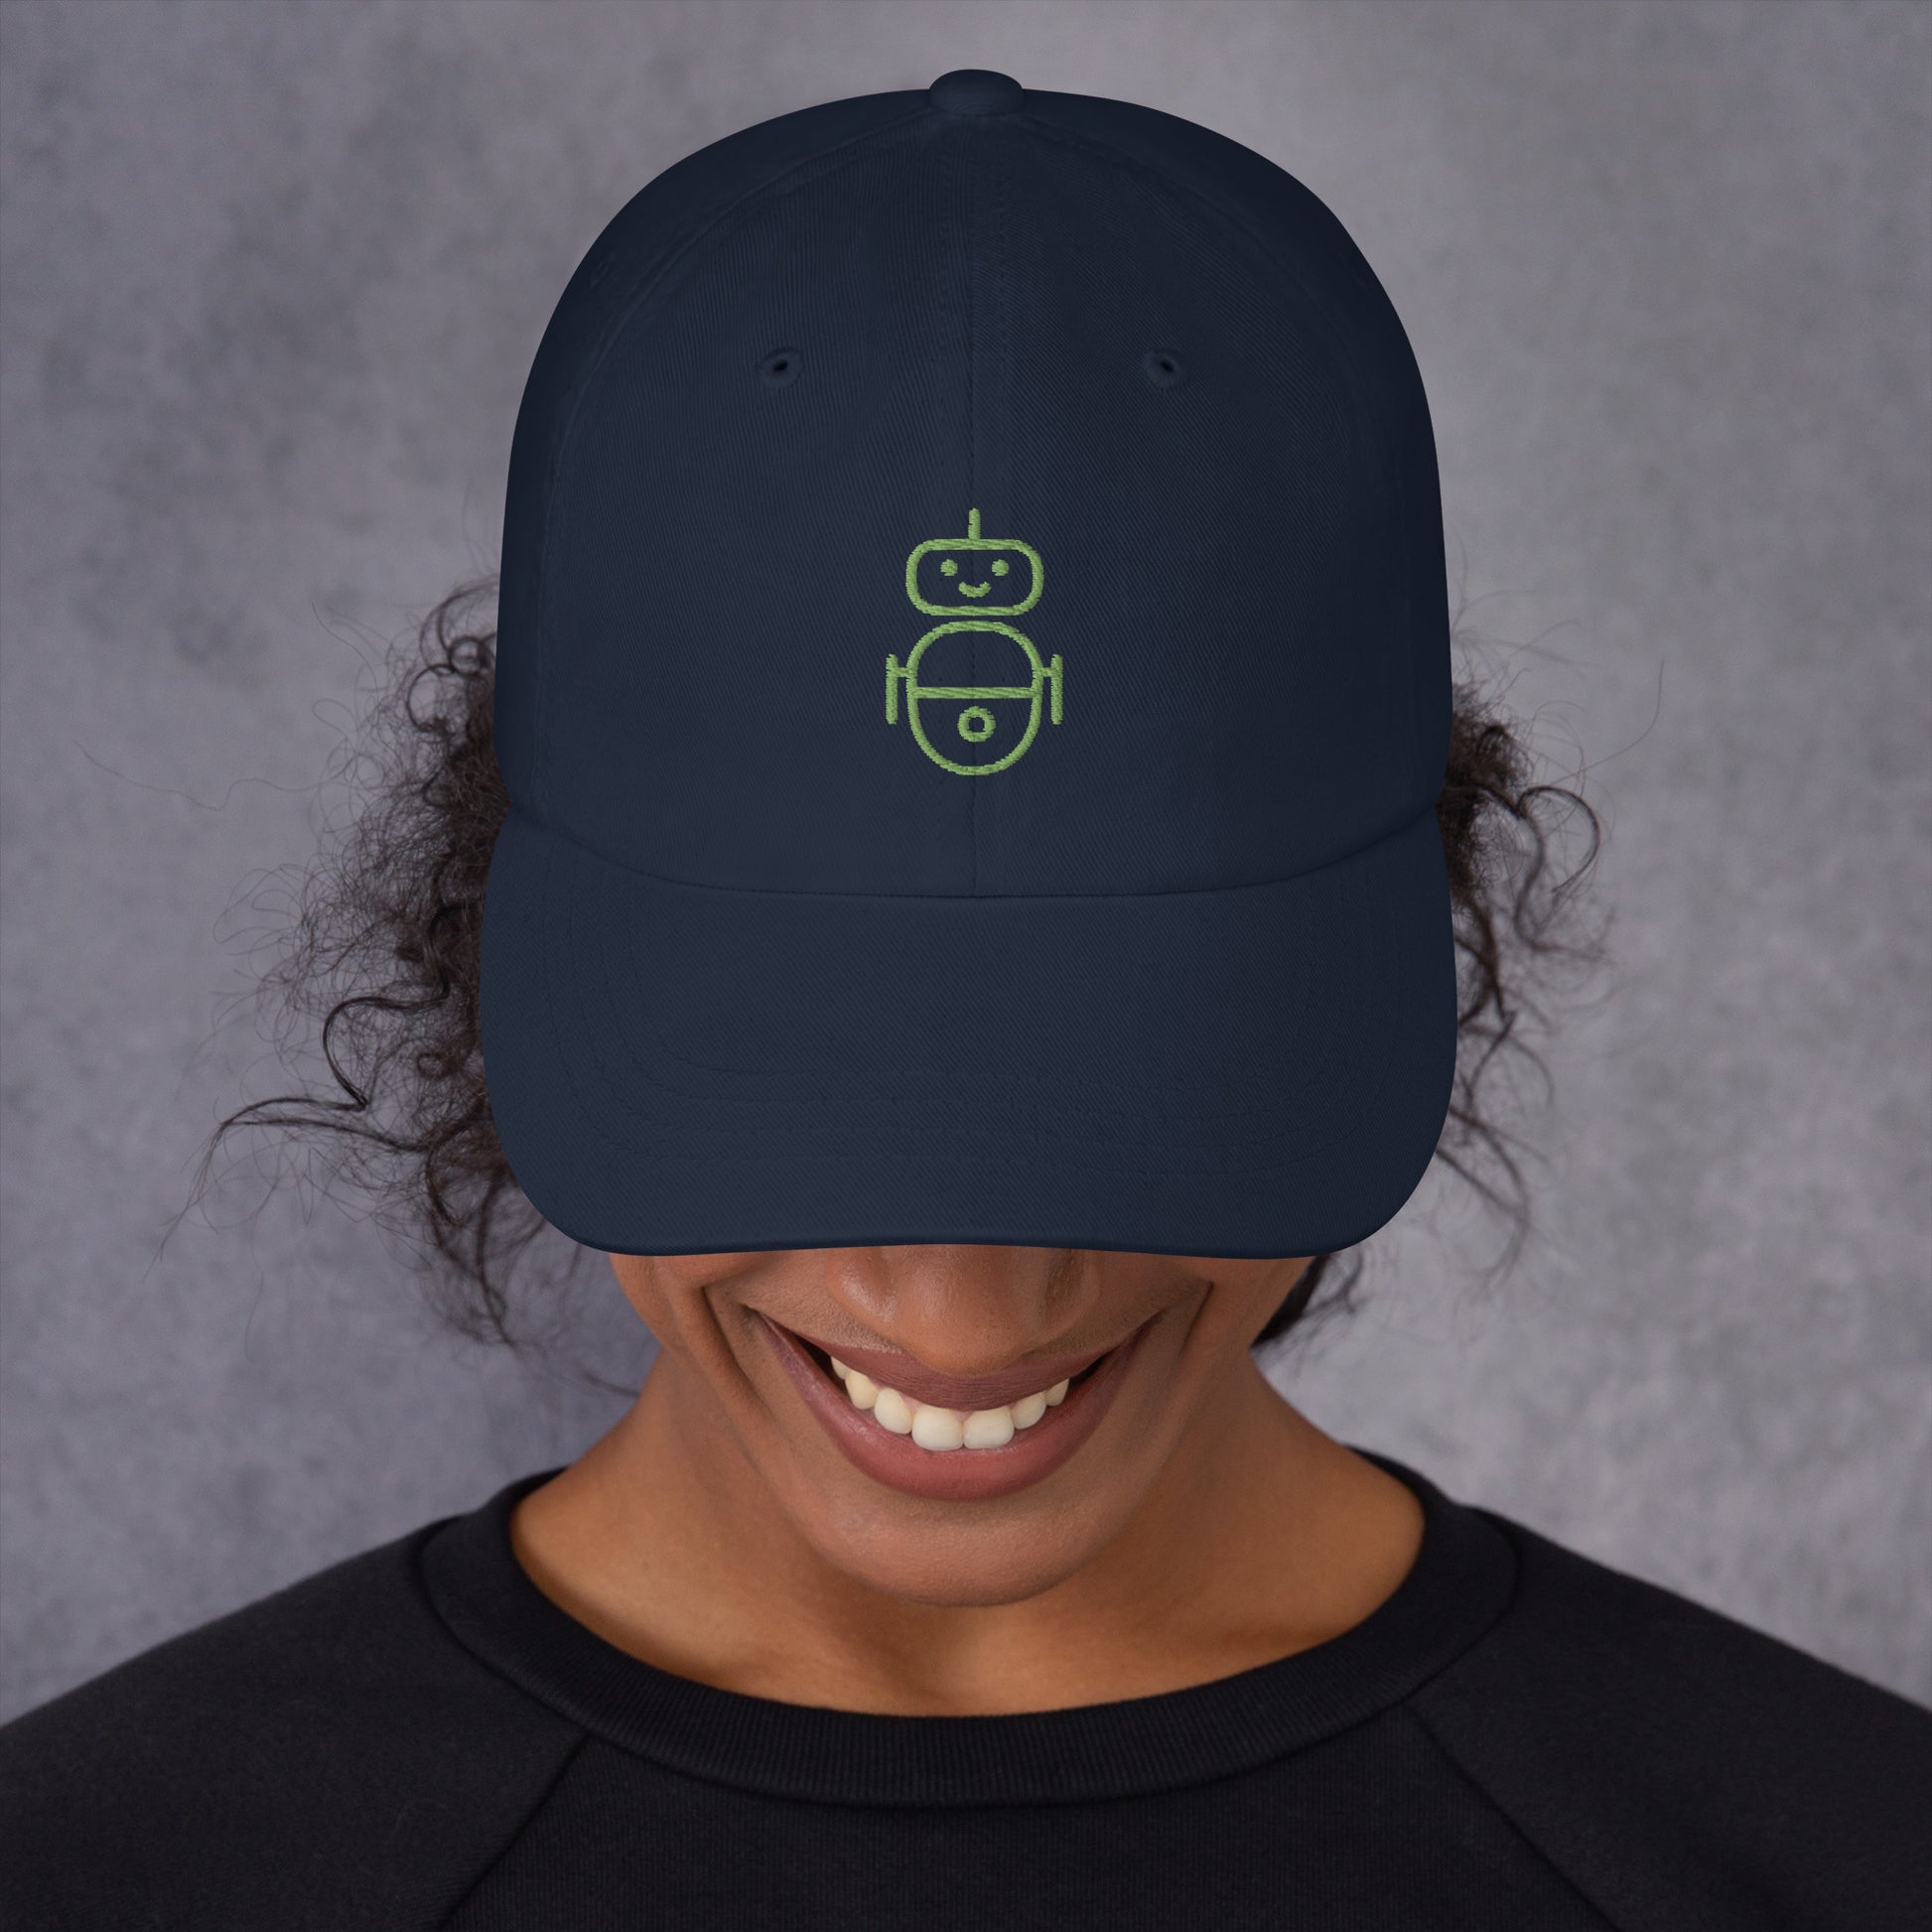 Women with navy hat with in green Android logo